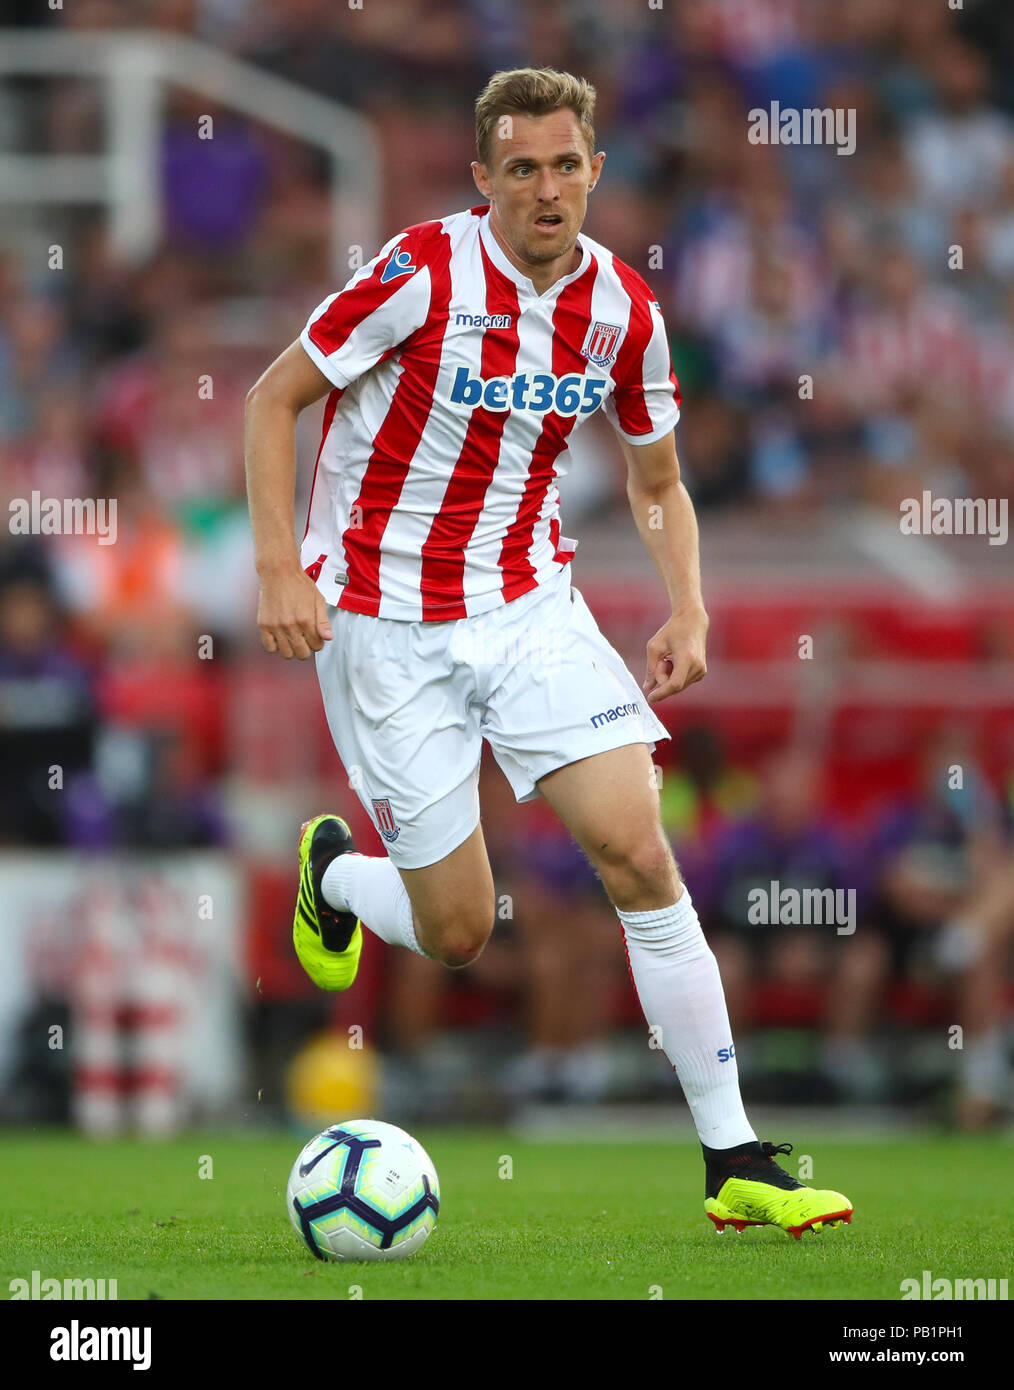 Stoke City's Darren Fletcher during a pre season friendly match at The Bet365 Stadium, Stoke. PRESS ASSOCIATION Photo. Picture date: Wednesday July 25, 2018. Photo credit should read: Nick Potts/PA Wire. EDITORIAL USE ONLY No use with unauthorised audio, video, data, fixture lists, club/league logos or "live" services. Online in-match use limited to 75 images, no video emulation. No use in betting, games or single club/league/player publications. Stock Photo